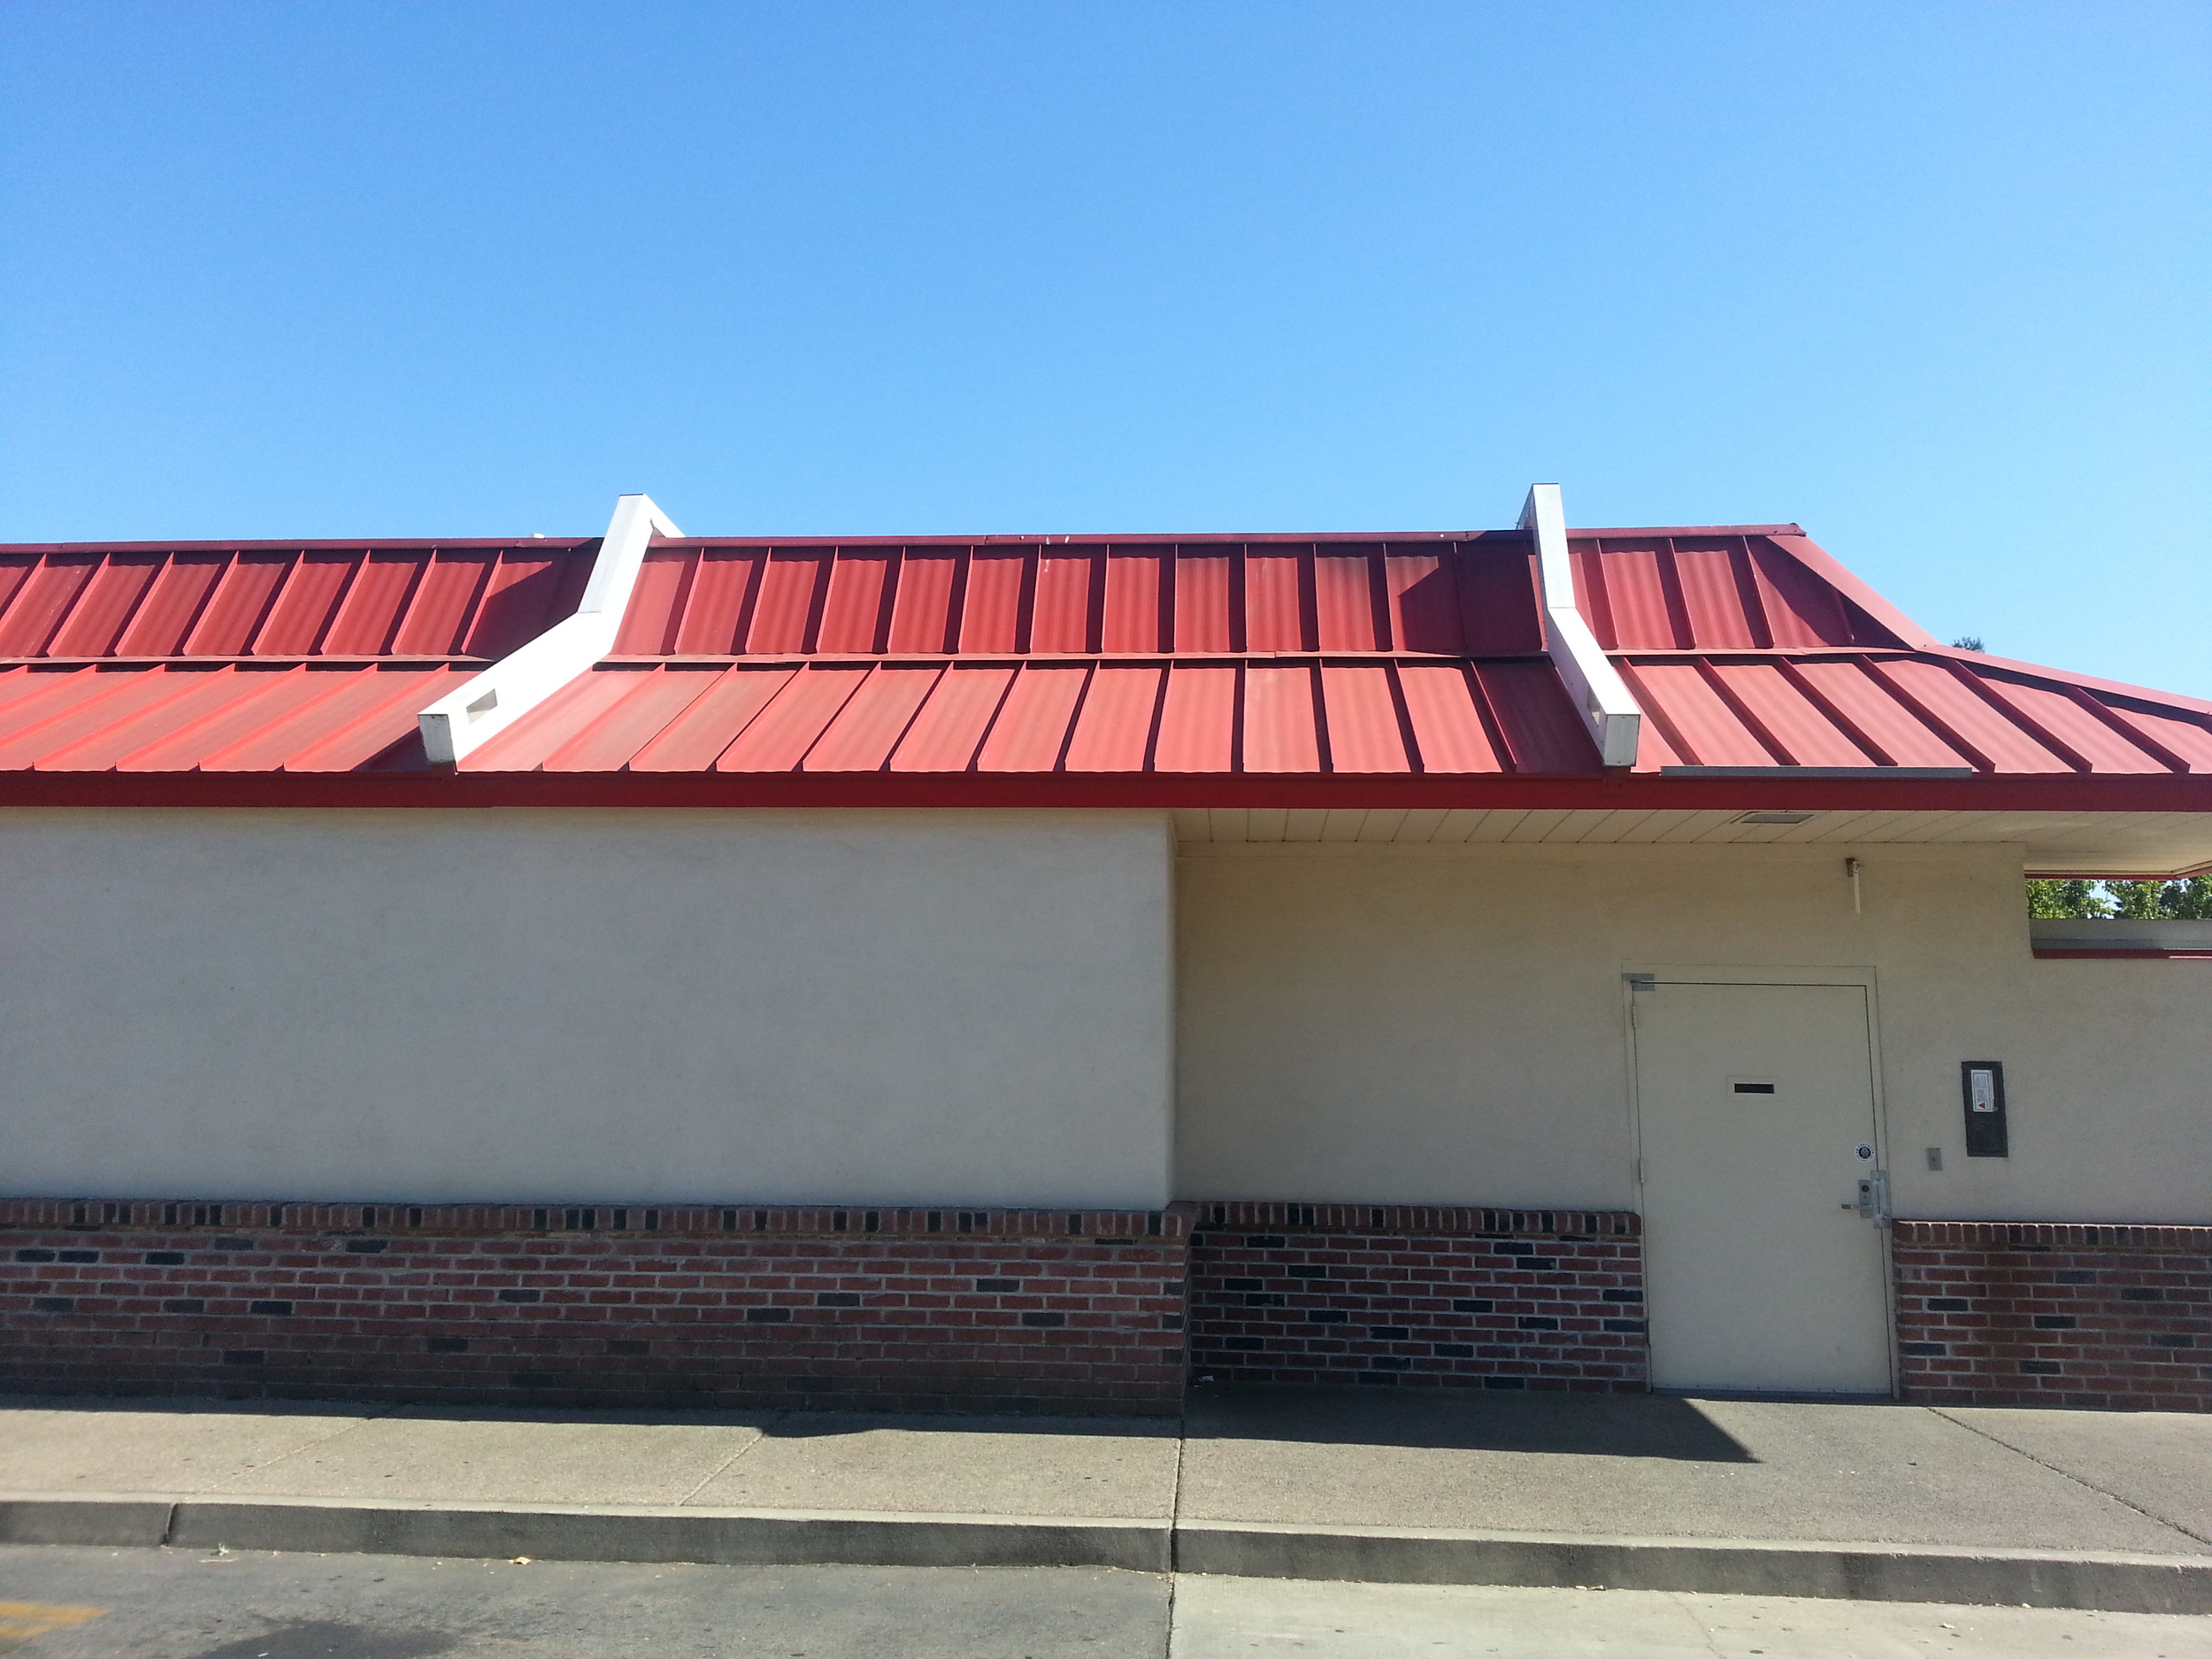 Completed Metal Roofing Project by Ved's Roofing of Yuba City, CA.